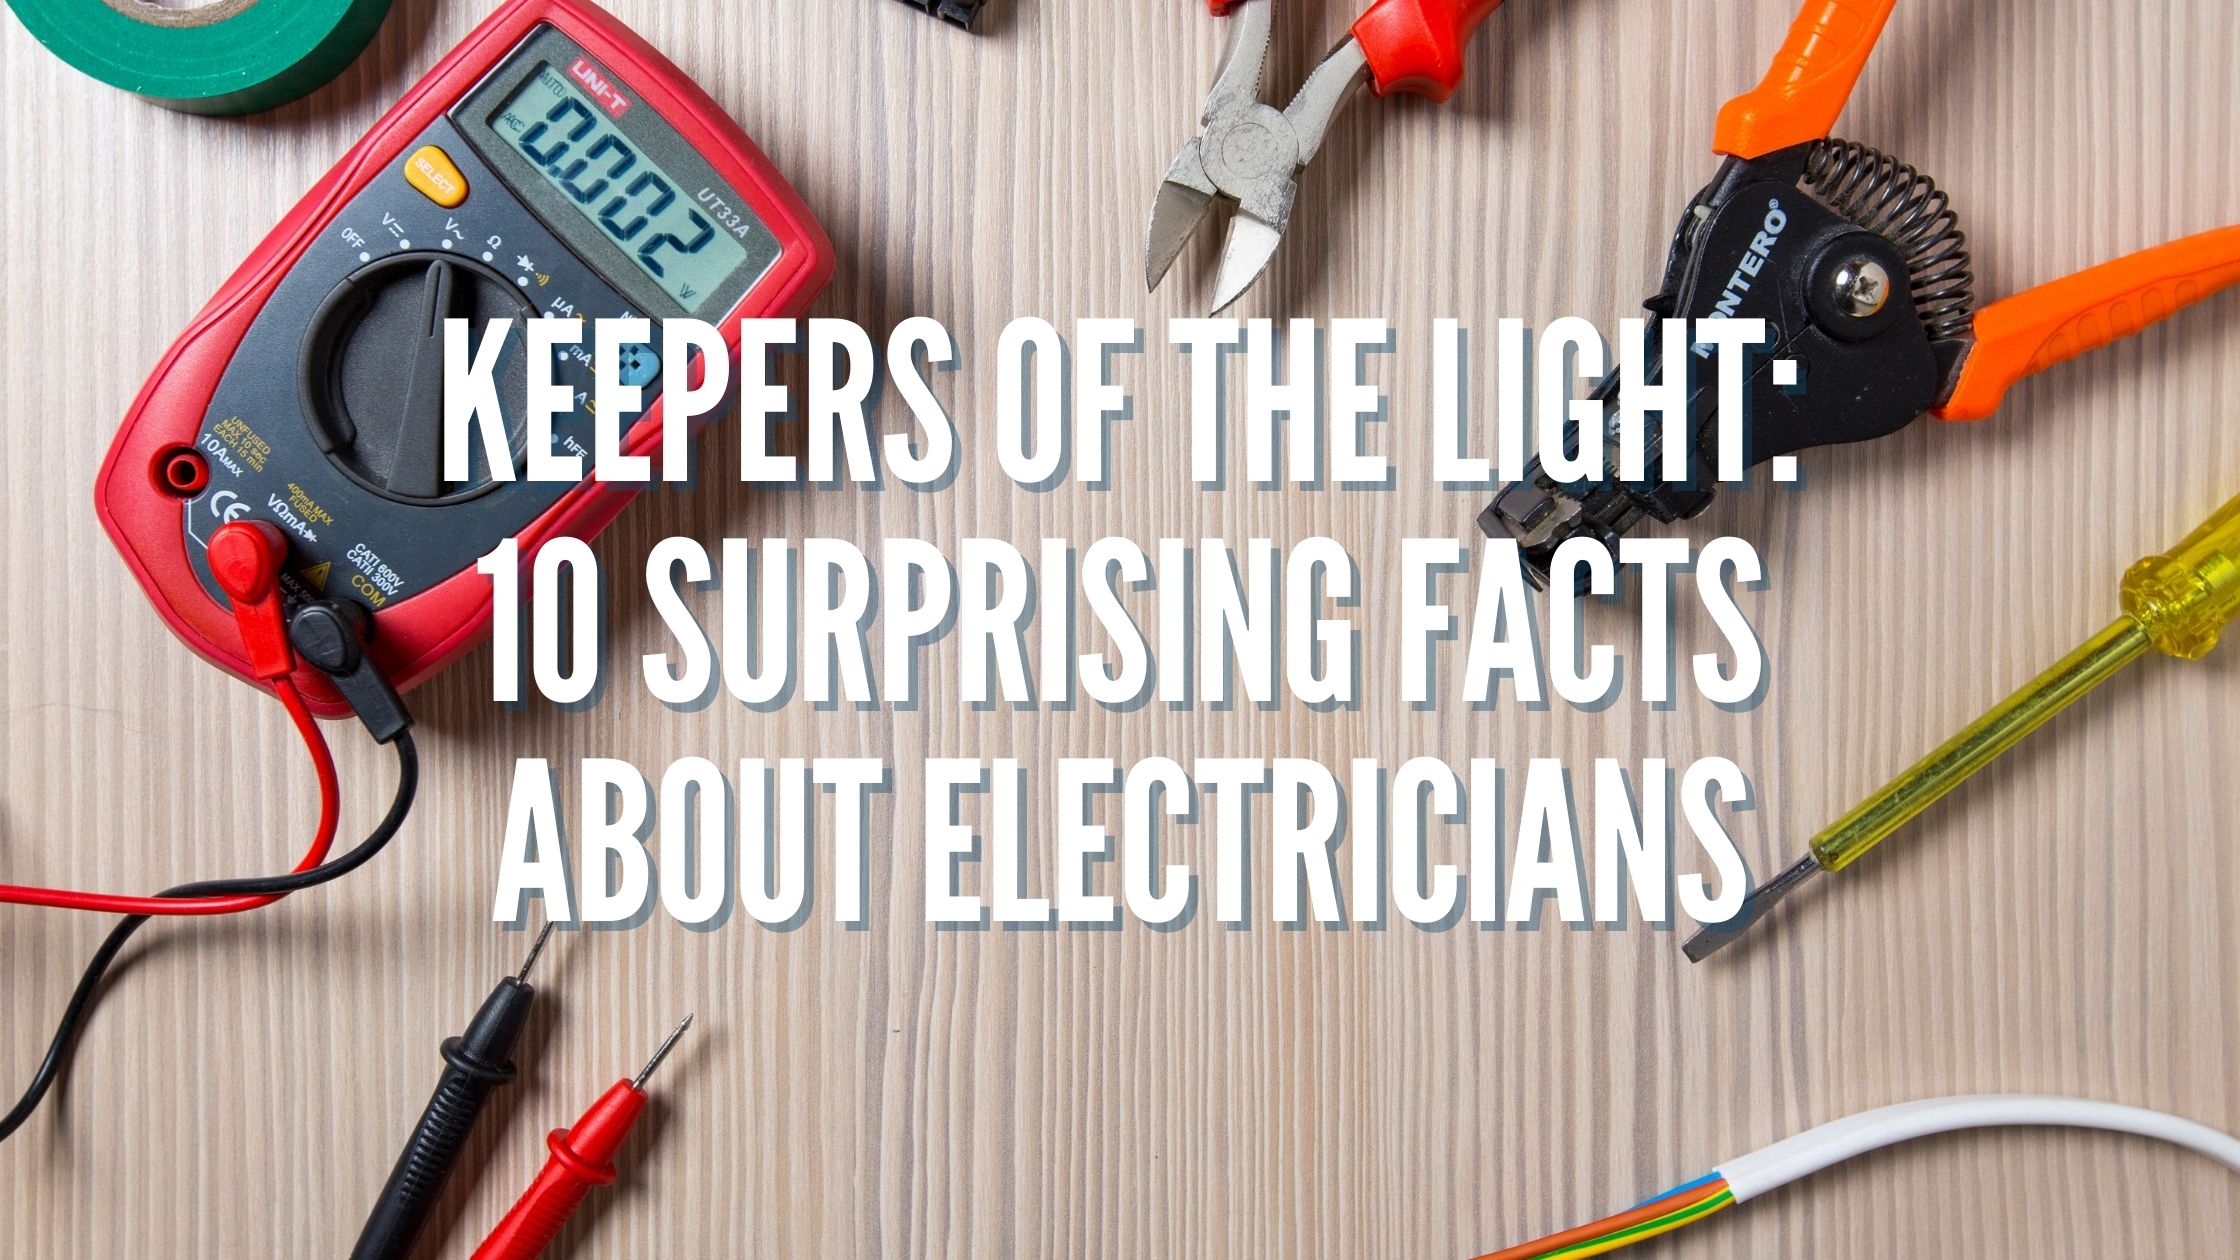 Keepers of the Light 10 Surprising Facts About Electricians